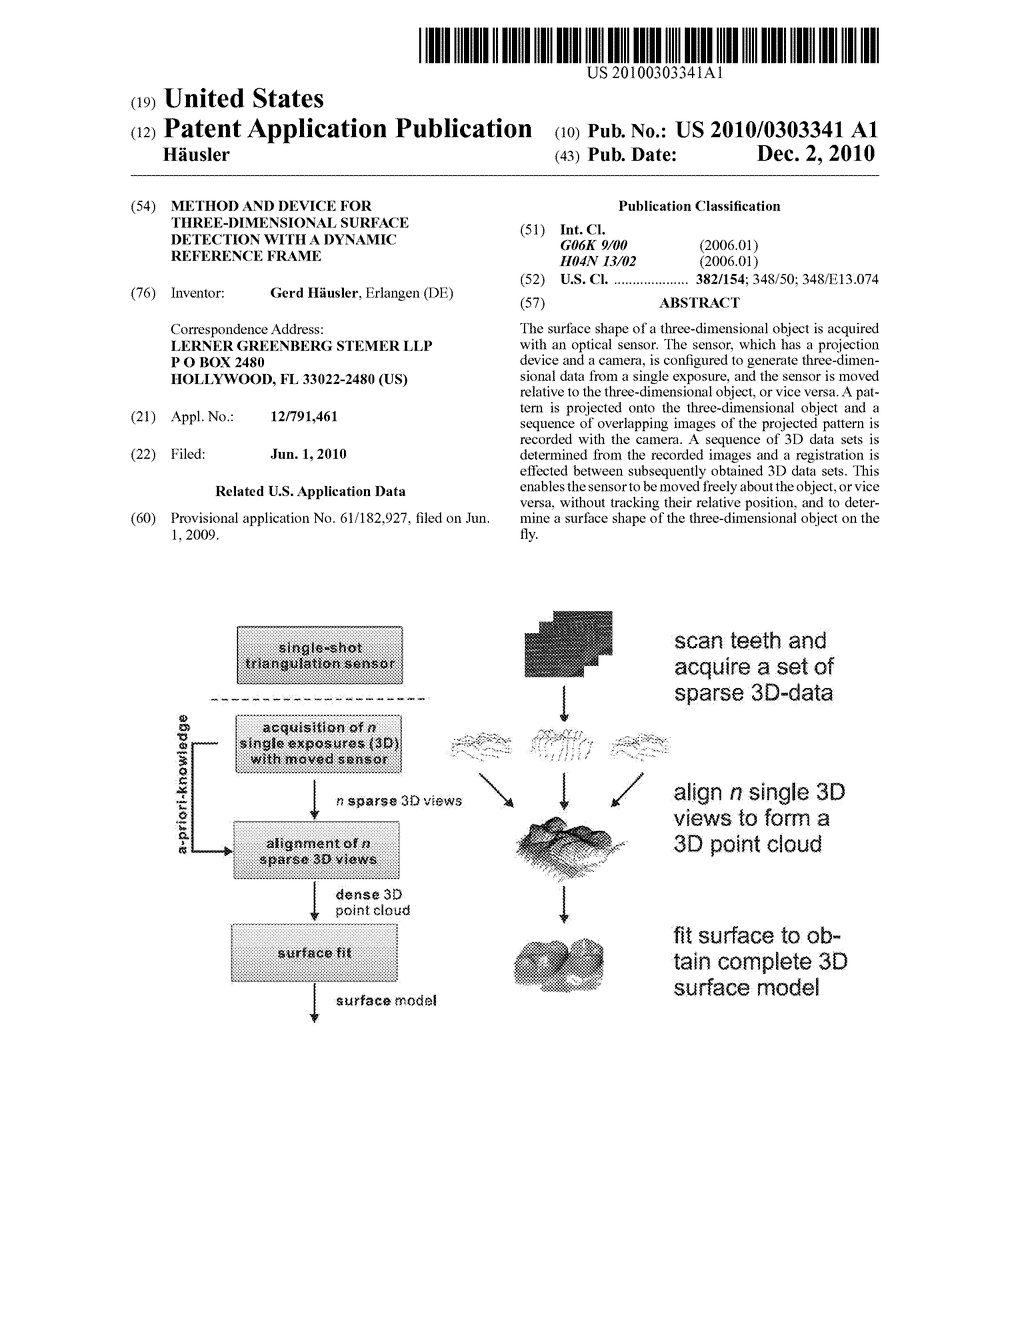 METHOD AND DEVICE FOR THREE-DIMENSIONAL SURFACE DETECTION WITH A DYNAMIC REFERENCE FRAME - diagram, schematic, and image 01